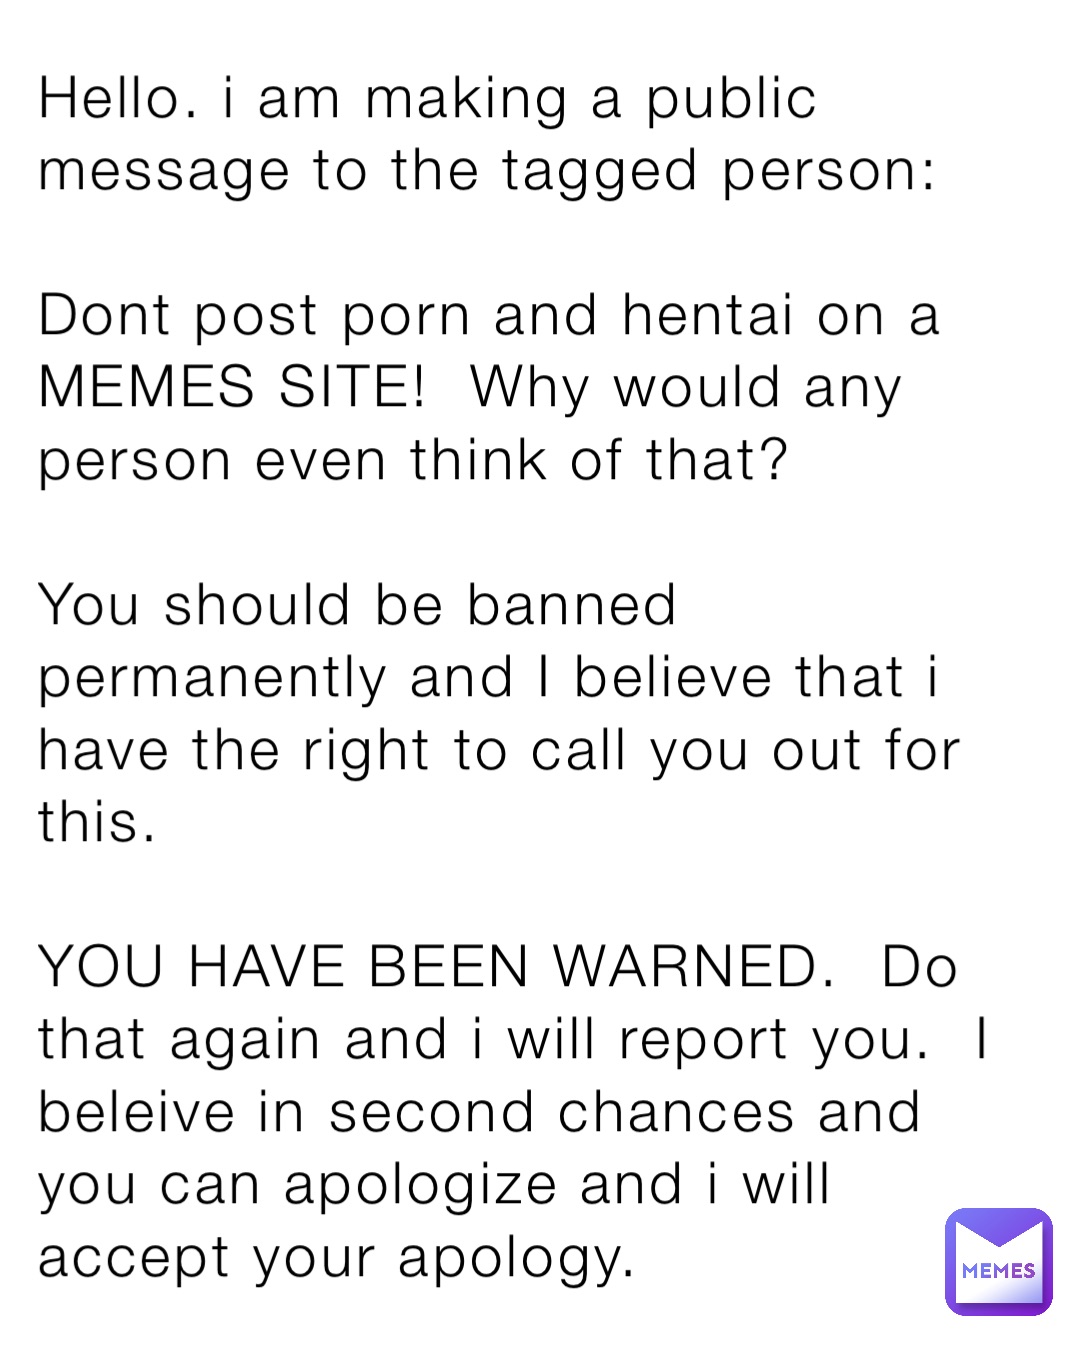 Hello. i am making a public message to the tagged person:

Dont post porn and hentai on a MEMES SITE!  Why would any person even think of that?

You should be banned permanently and I believe that i have the right to call you out for this.

YOU HAVE BEEN WARNED.  Do that again and i will report you.  I beleive in second chances and you can apologize and i will accept your apology.